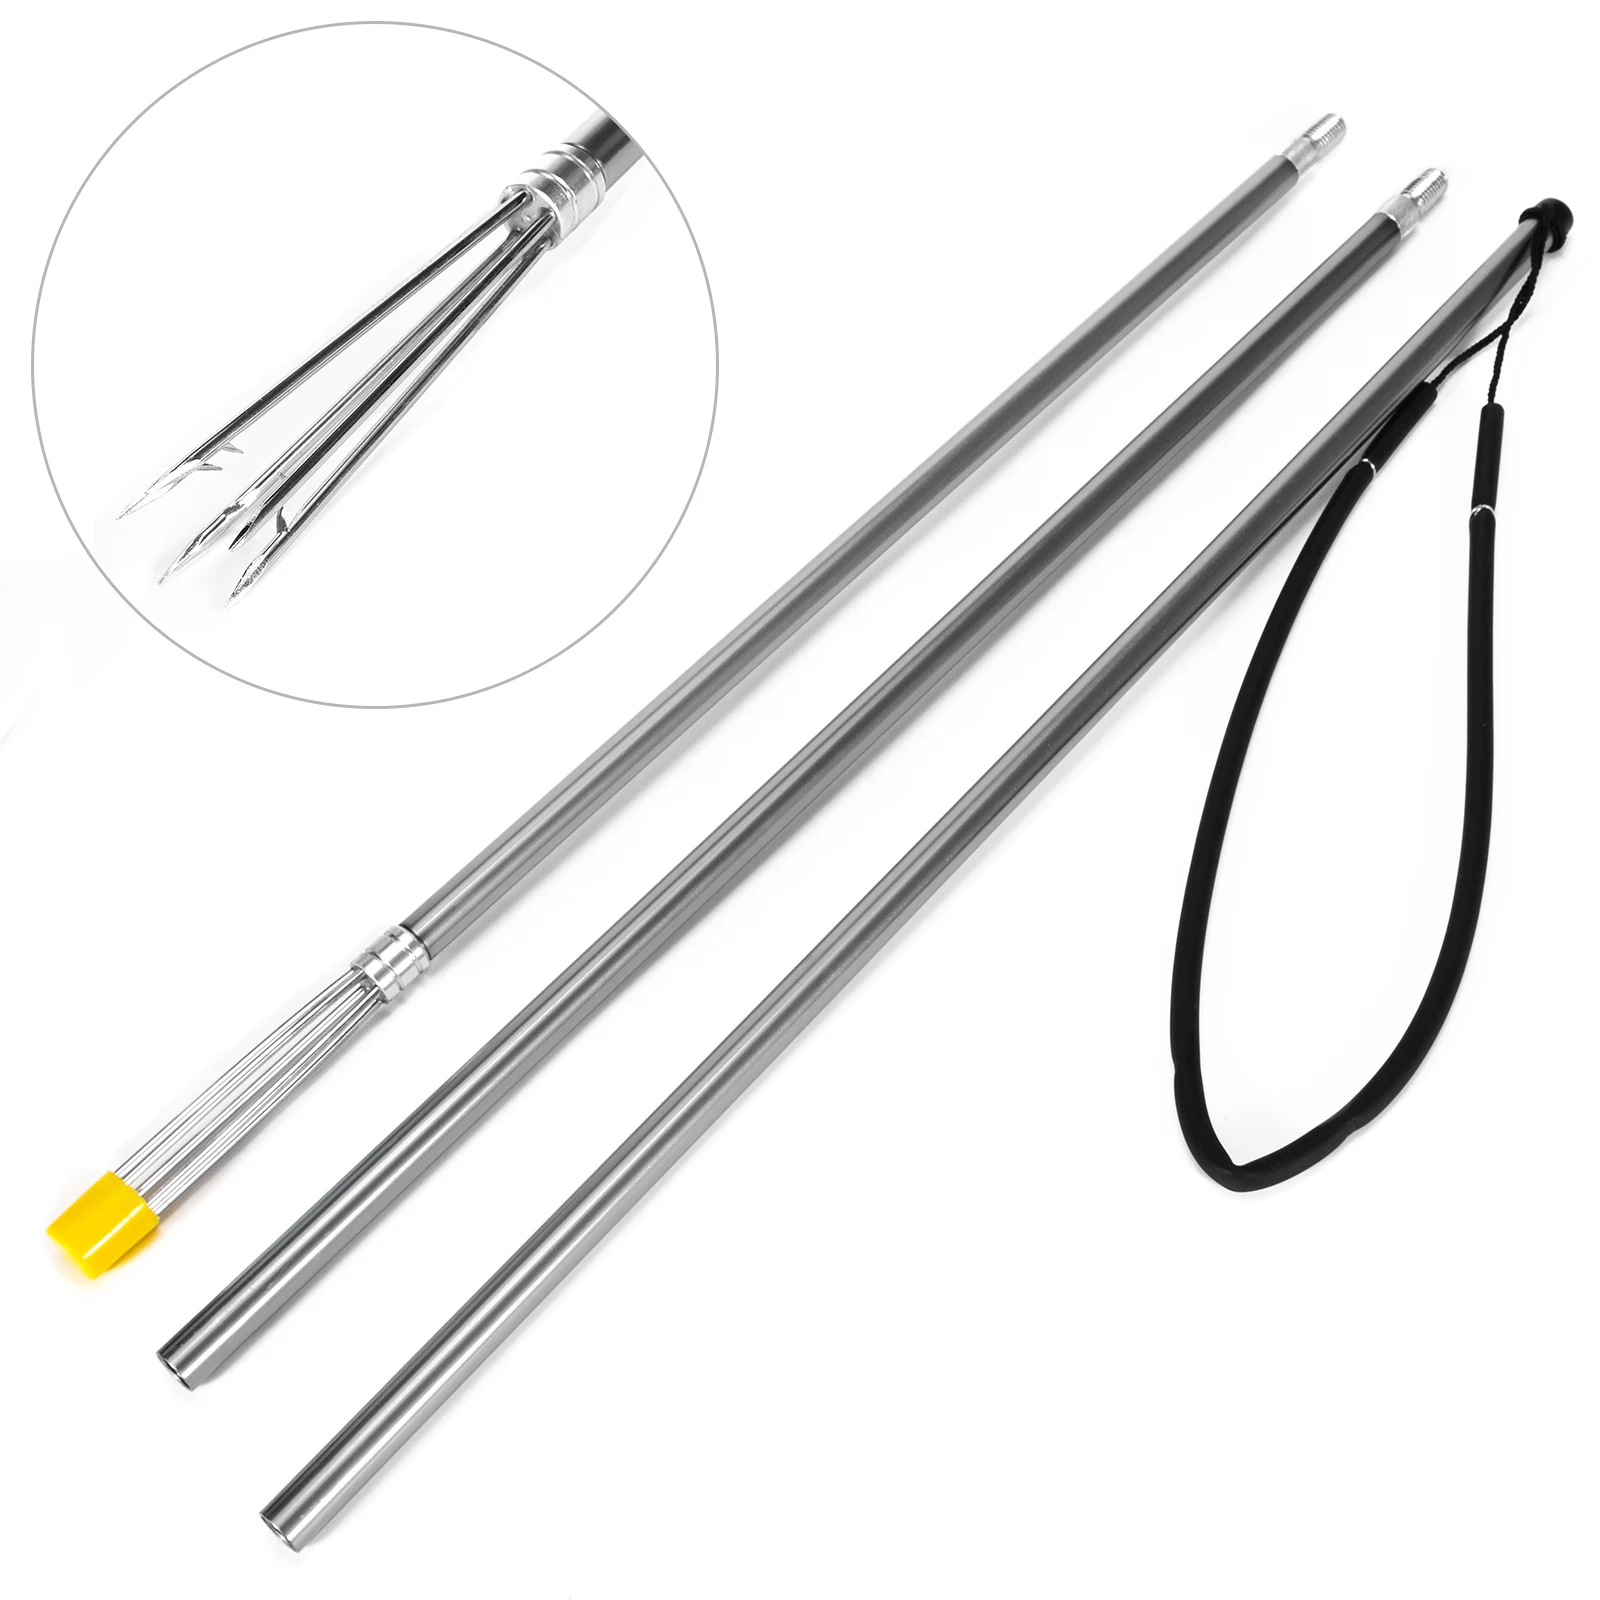 Portable Removable Aluminum Alloy Detachable 3-piece Fish Harpoon Stainless Steel Fork With Barbed Rod Spear Gig Fishing Tool